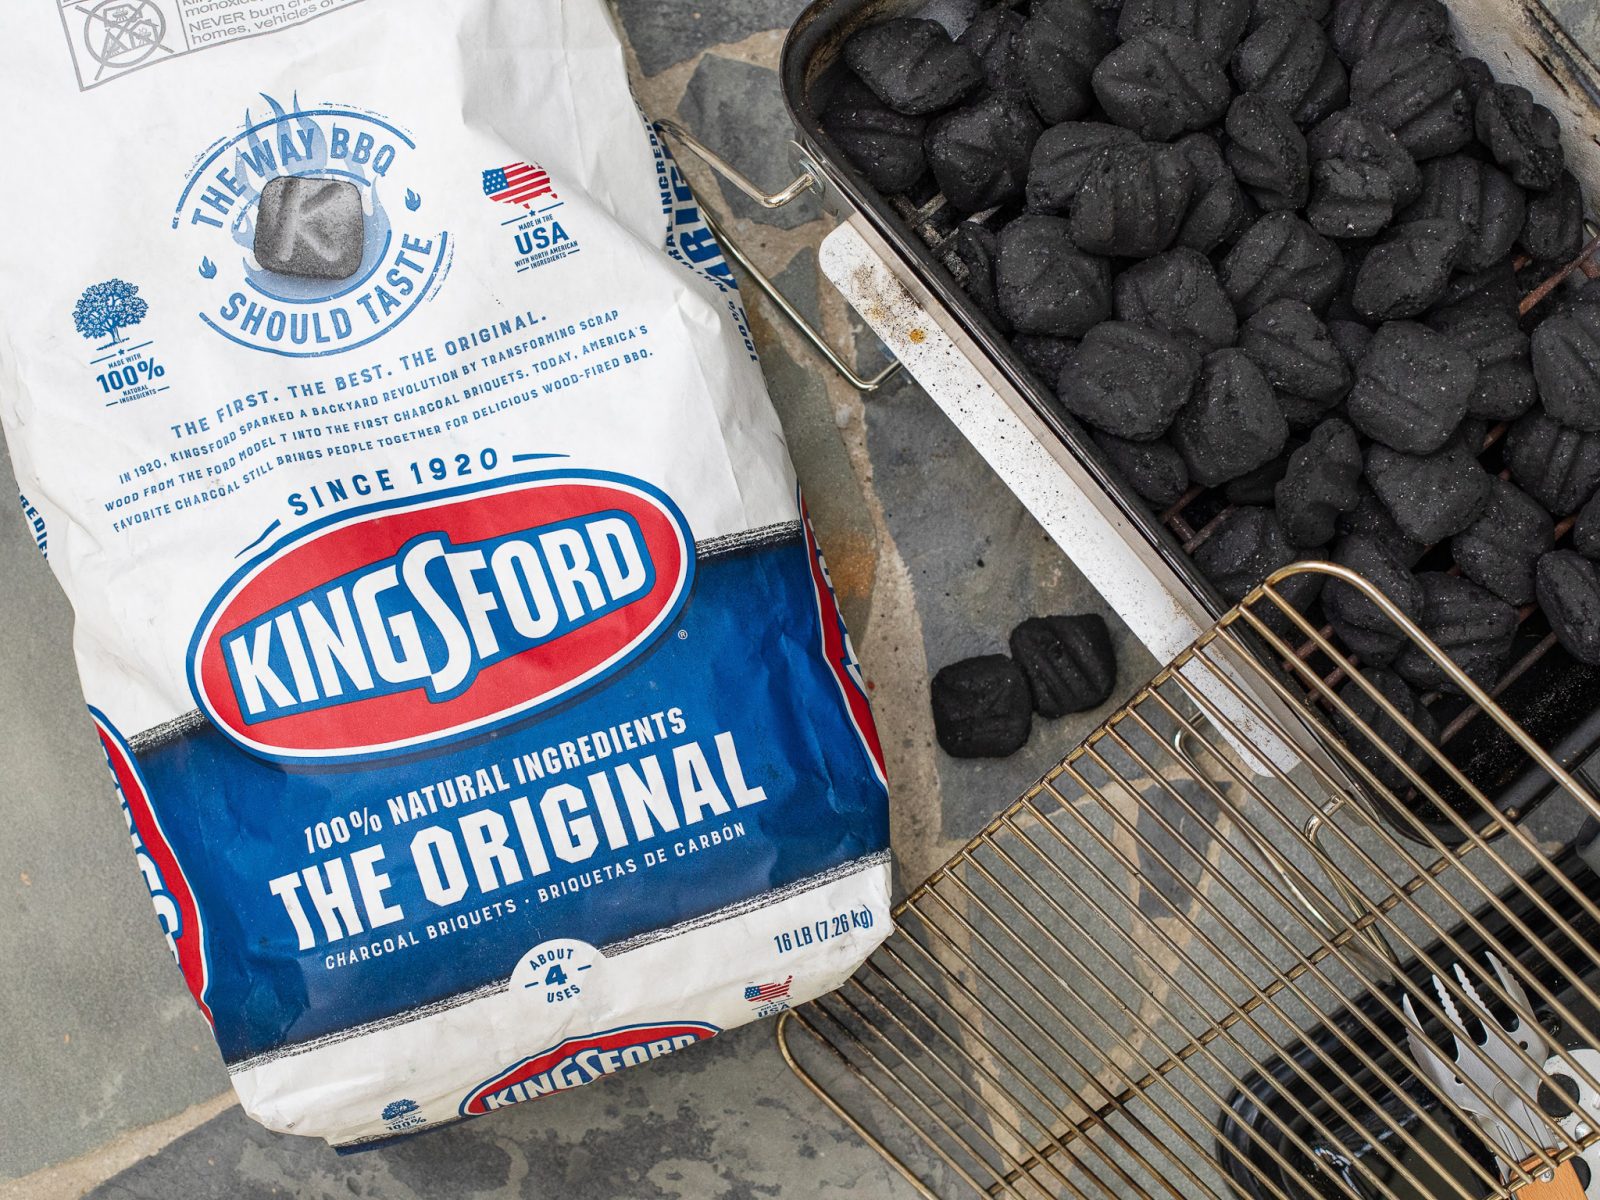 Kingsford Charcoal As Low As $8.99 At Kroger (Regular Price $13.99)